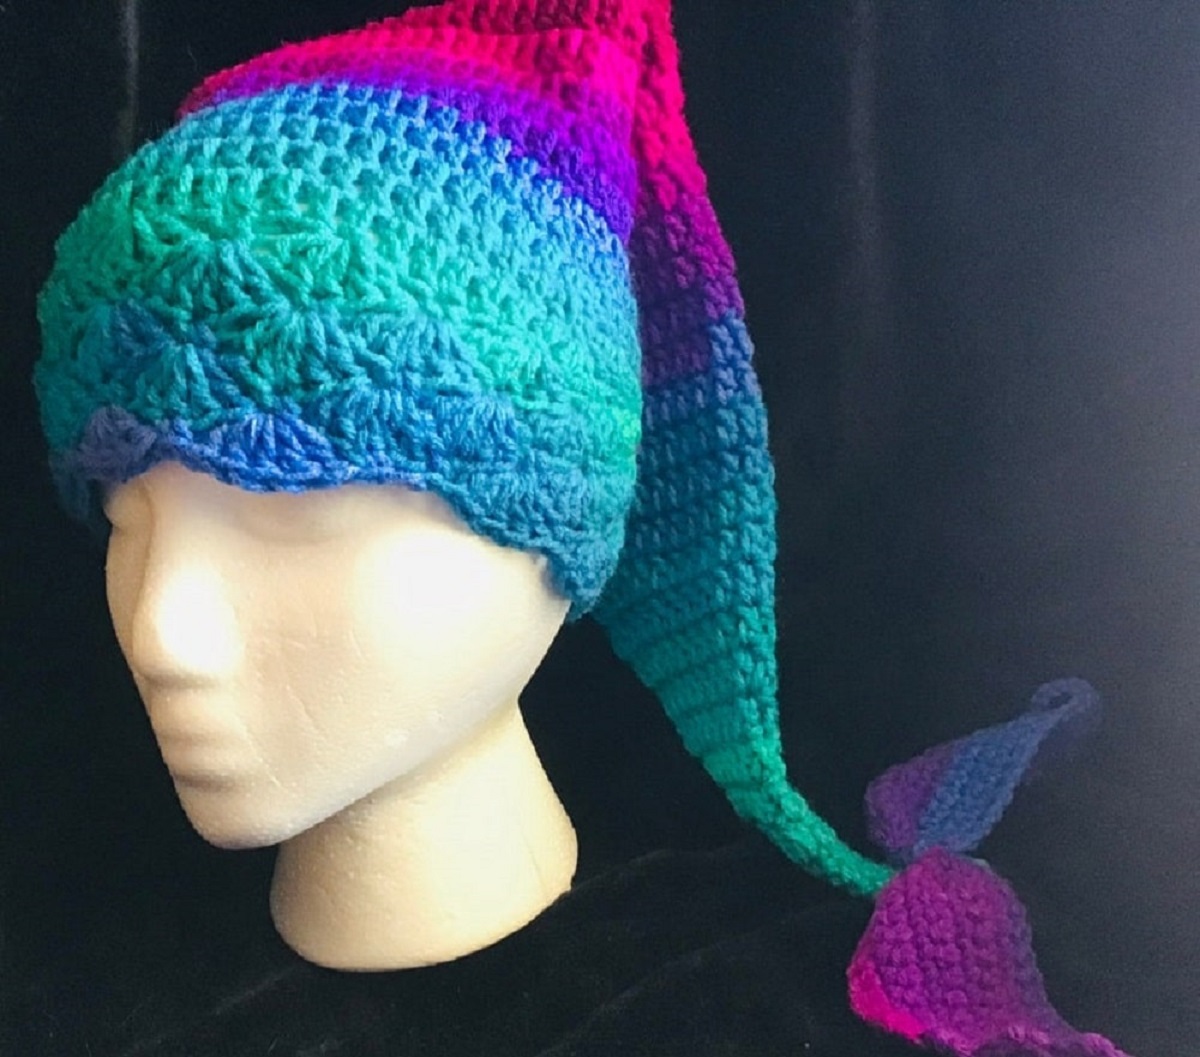 Mannequin wearing a blue, green, purple, and pink crochet beanie hat with a mermaid tail flowing behind.